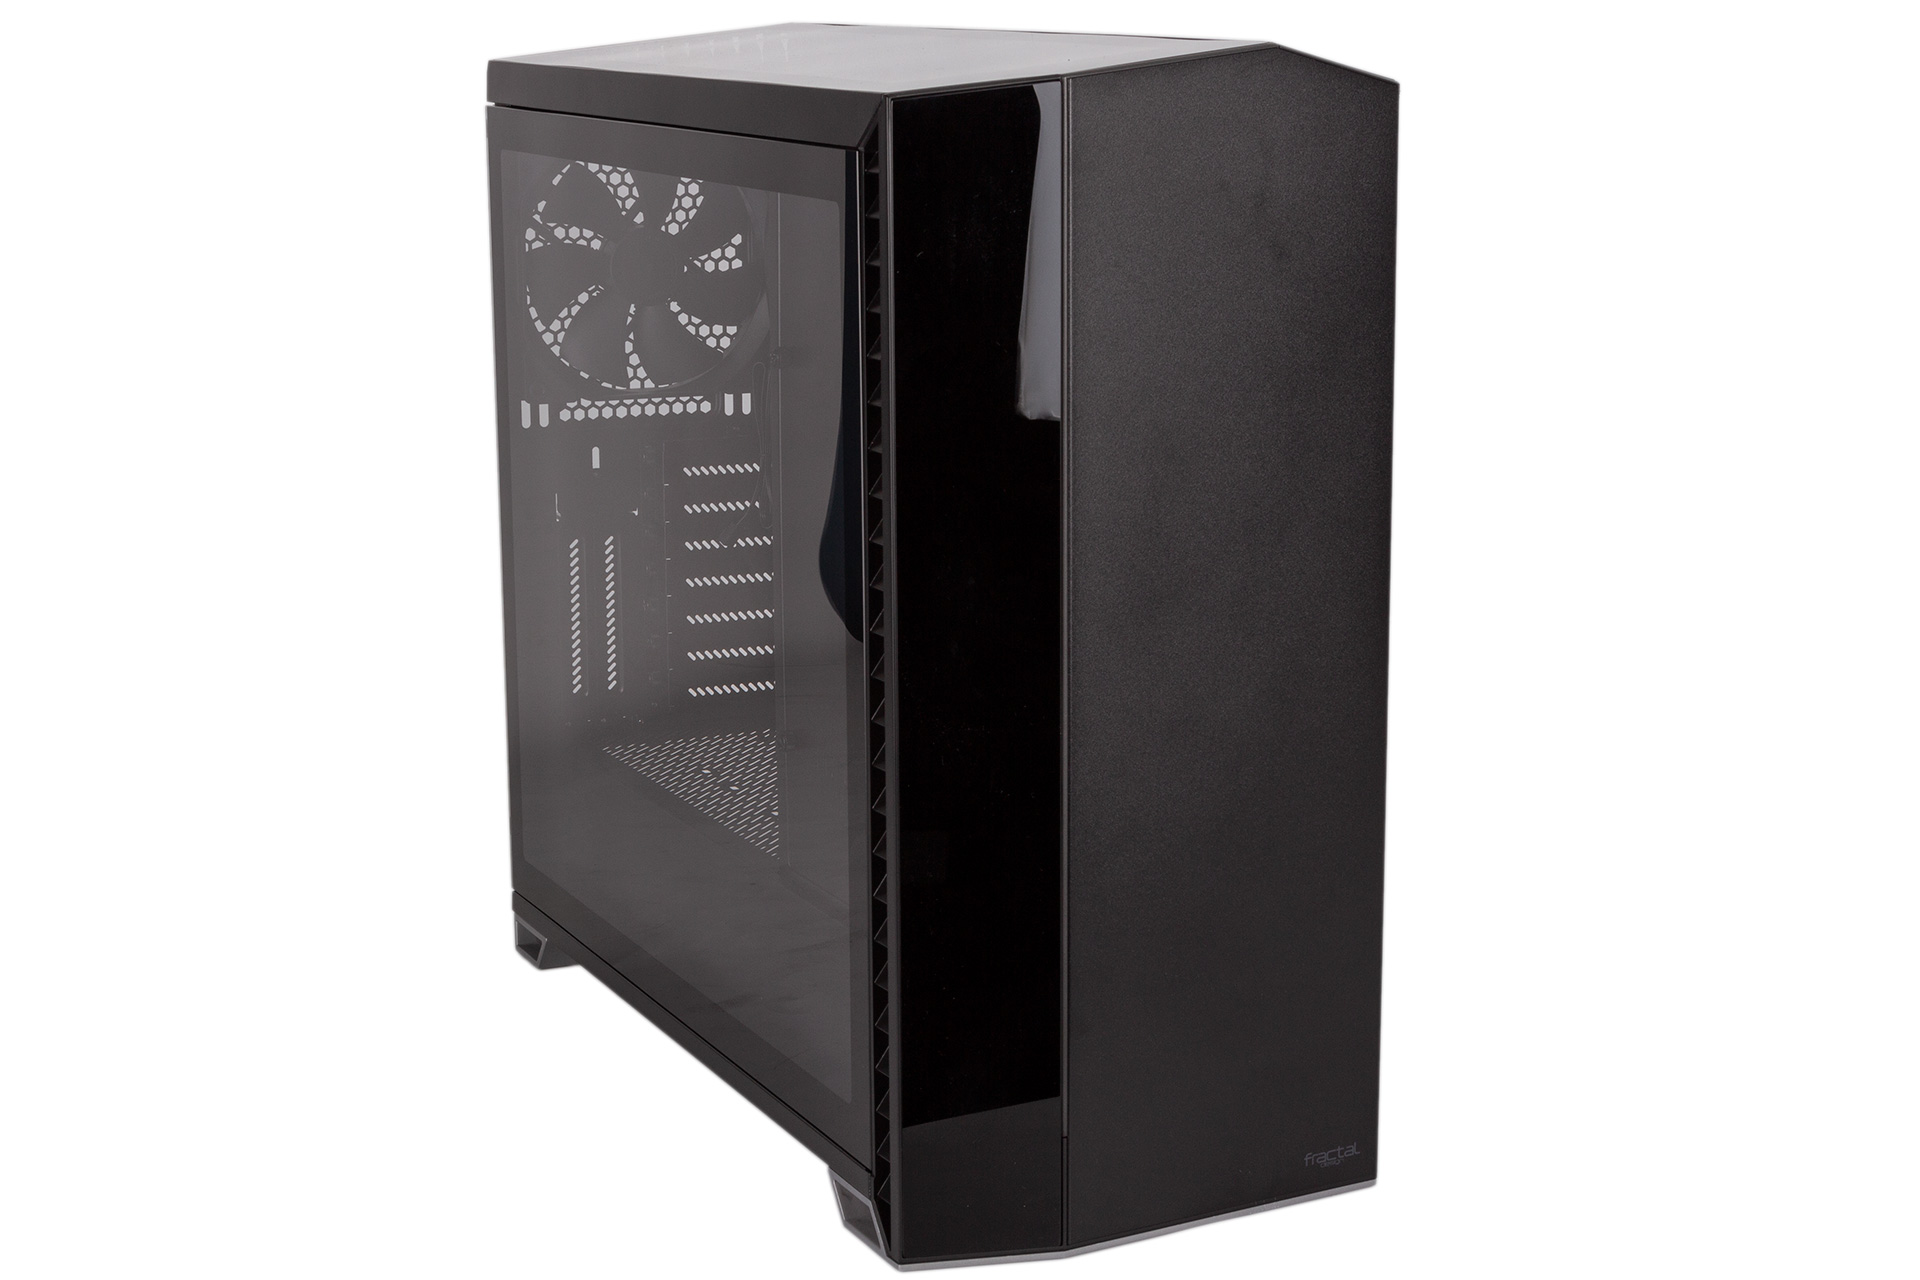 Introducing Vector RS – a new mid-tower from Fractal Design — Fractal Design